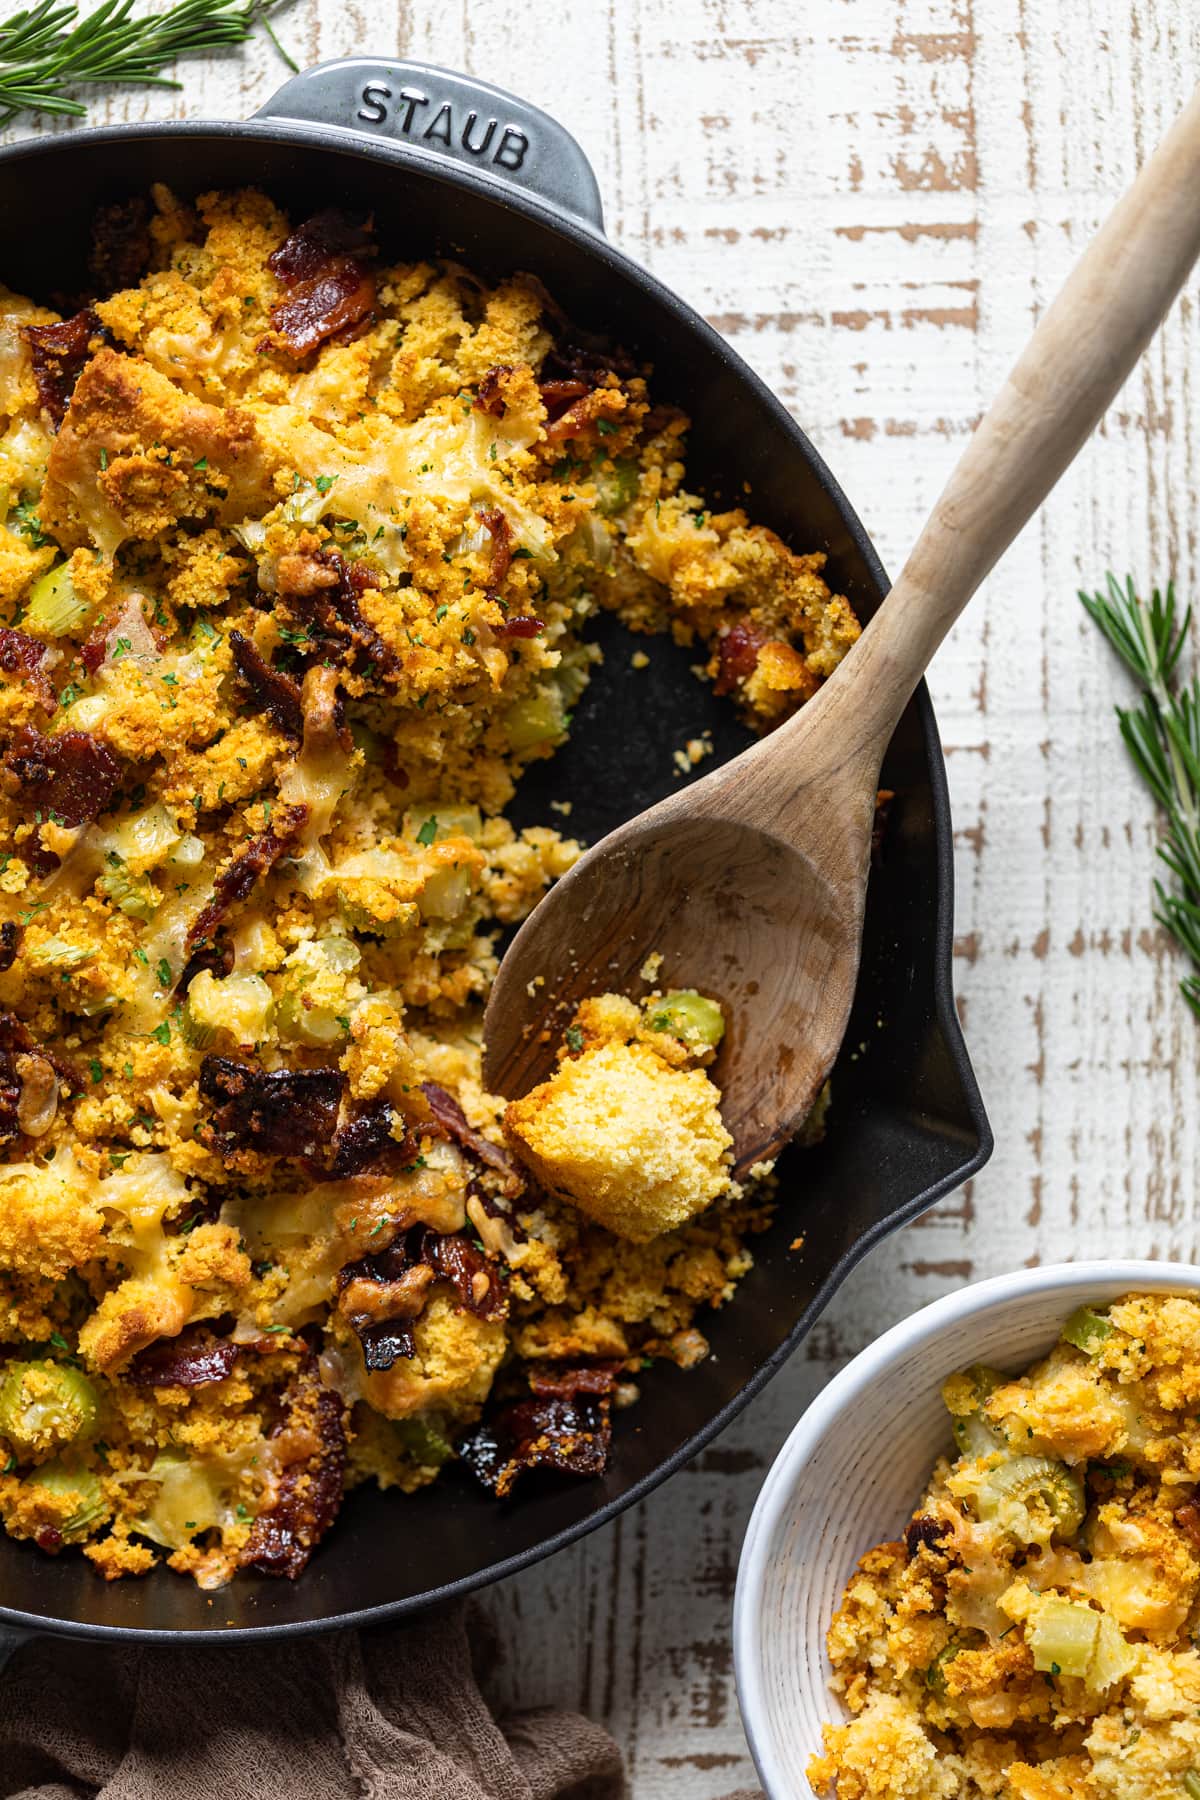 Wooden spoon scooping Southern-Styled Cornbread Stuffing into a bowl